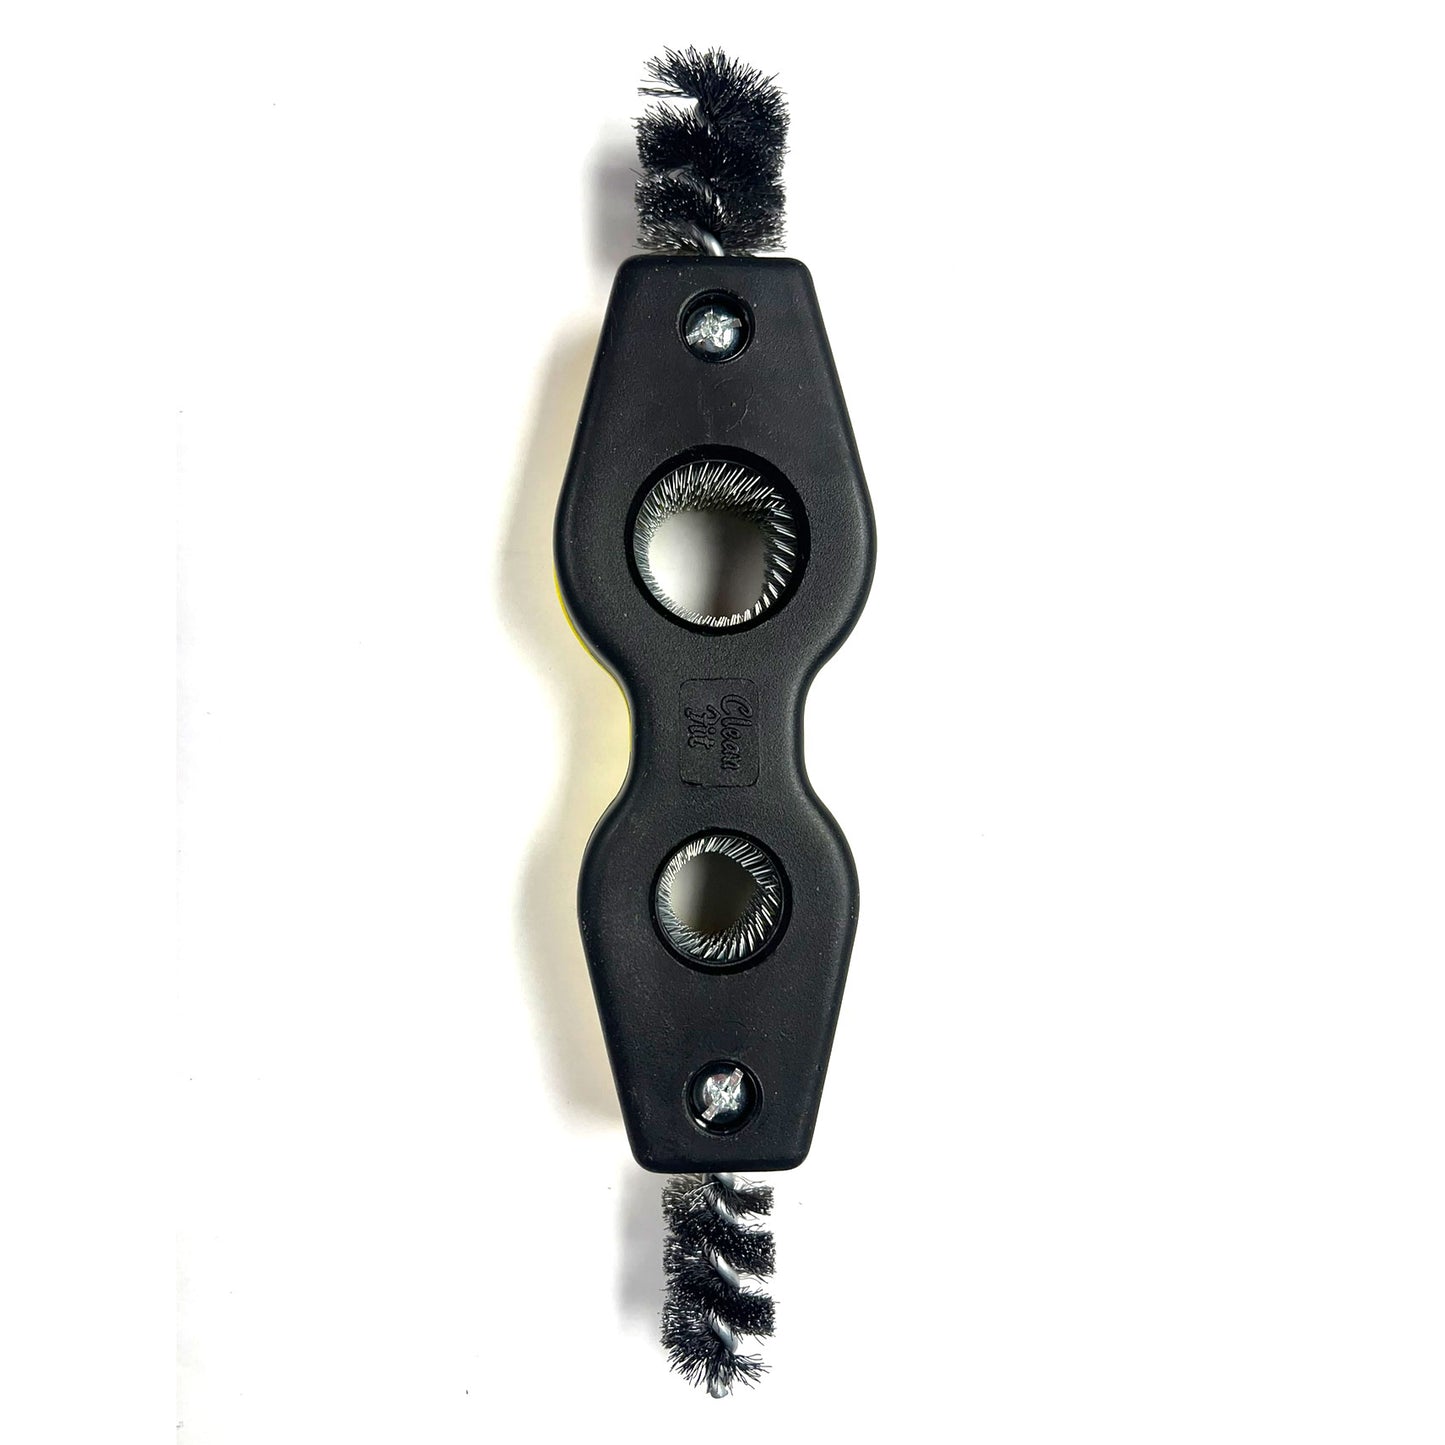 70264 - 4-in-1 Carbon Steel Fitting & Tube Cleaning Brush